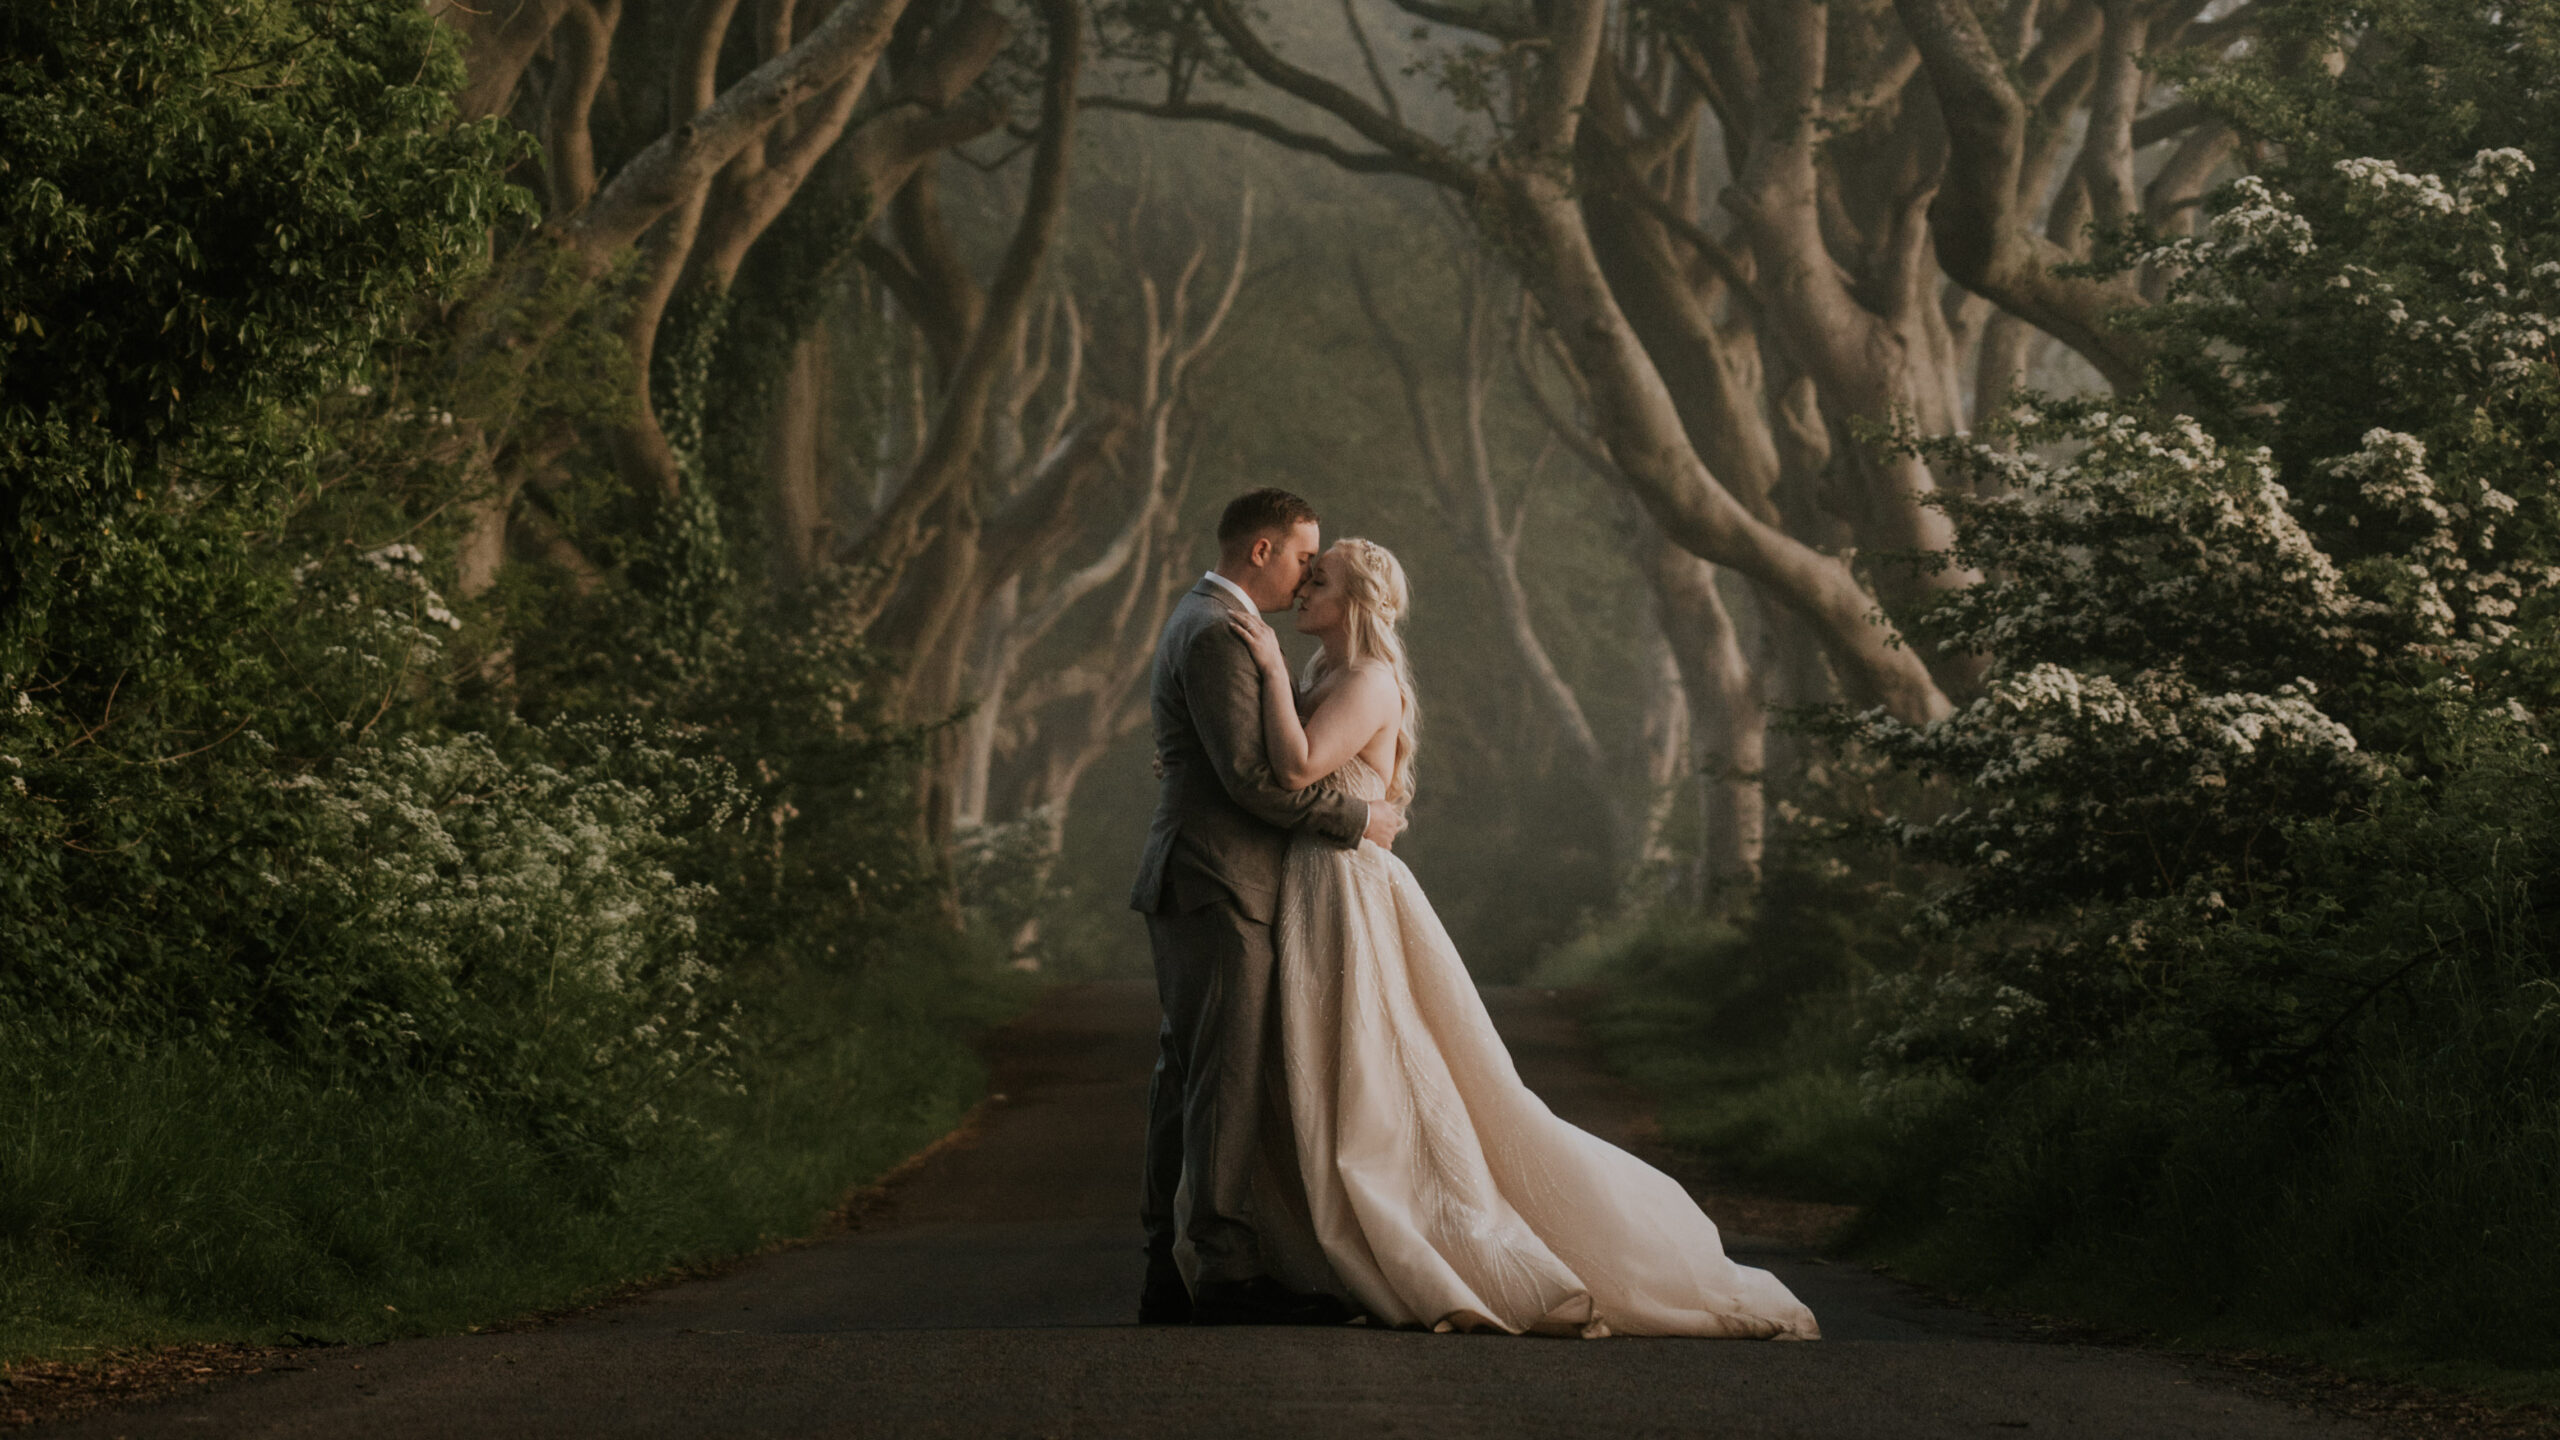 couple at dark hedges kings road in northern ireland set to dramatic trees and fog